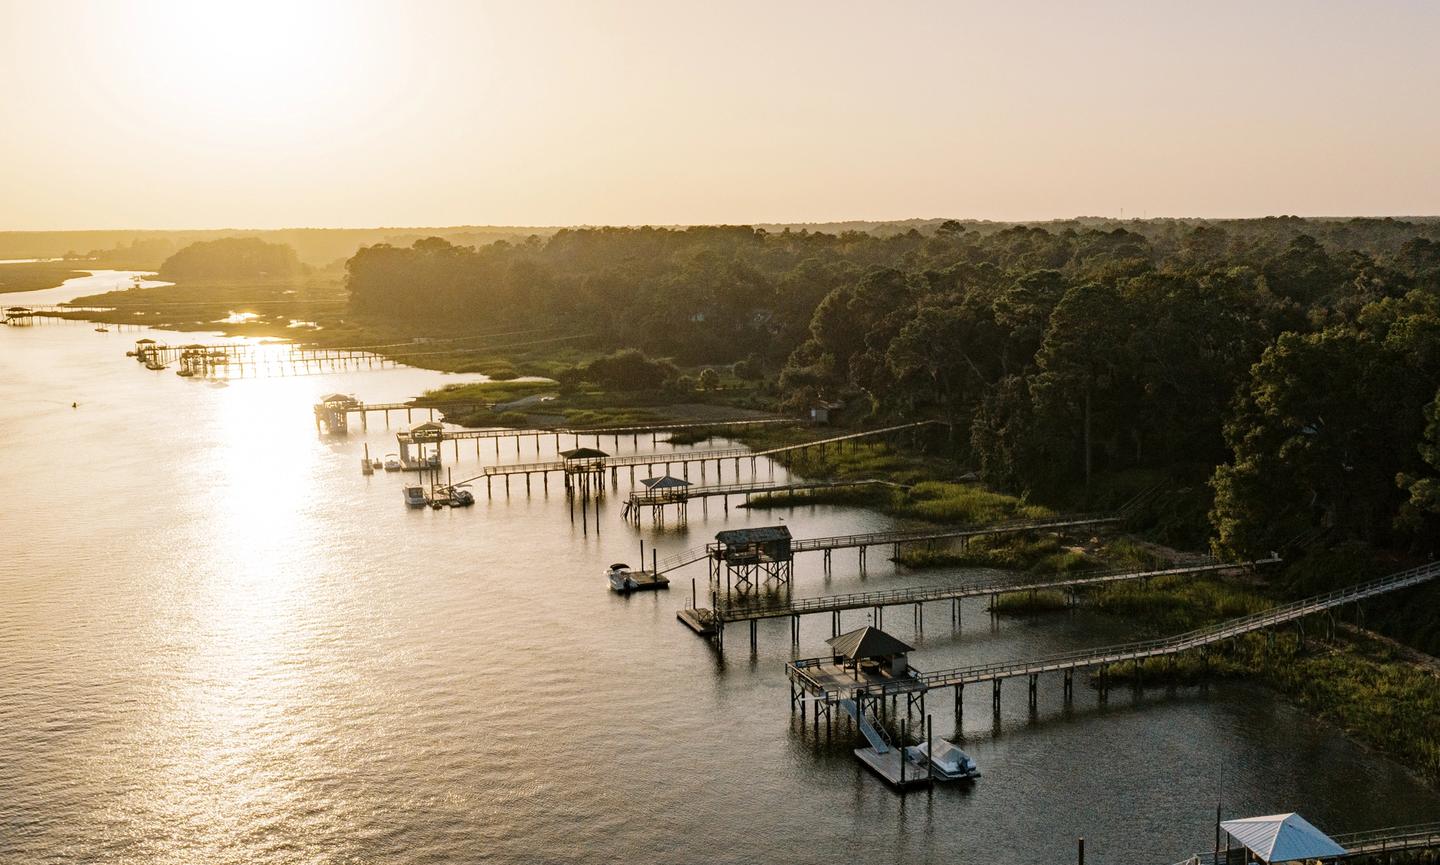 Gorgeous view along the May River in Bluffton, South Carolina. Photo credit: Ian V. Santiago, IVS Photography.